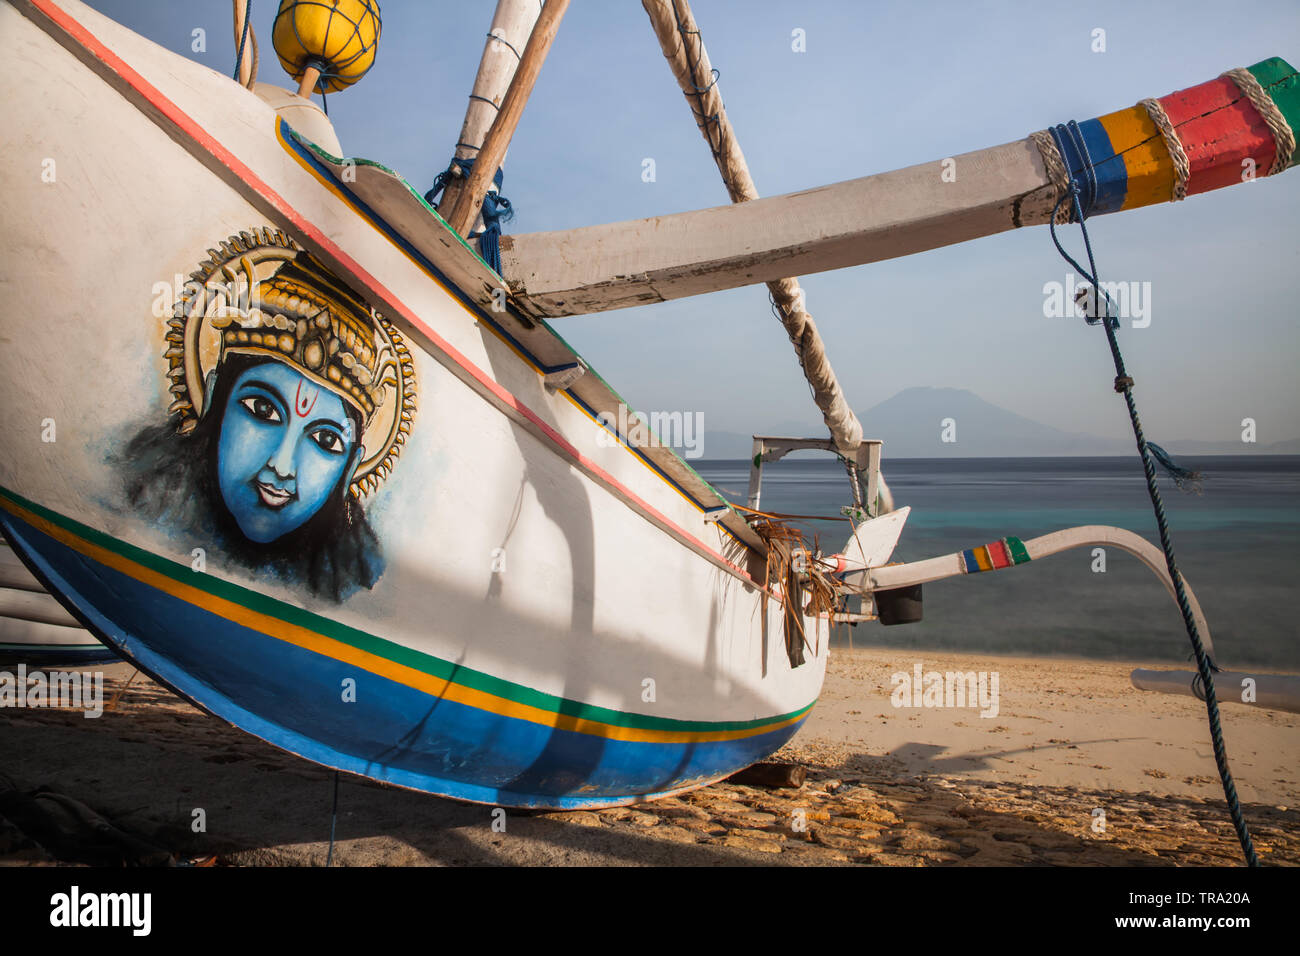 Indonesia Jukung or traditional fishing boat decorated with a beautiful painting of the Hindu God Shiva and anchored on a beach at Nusa Penida Island. Stock Photo